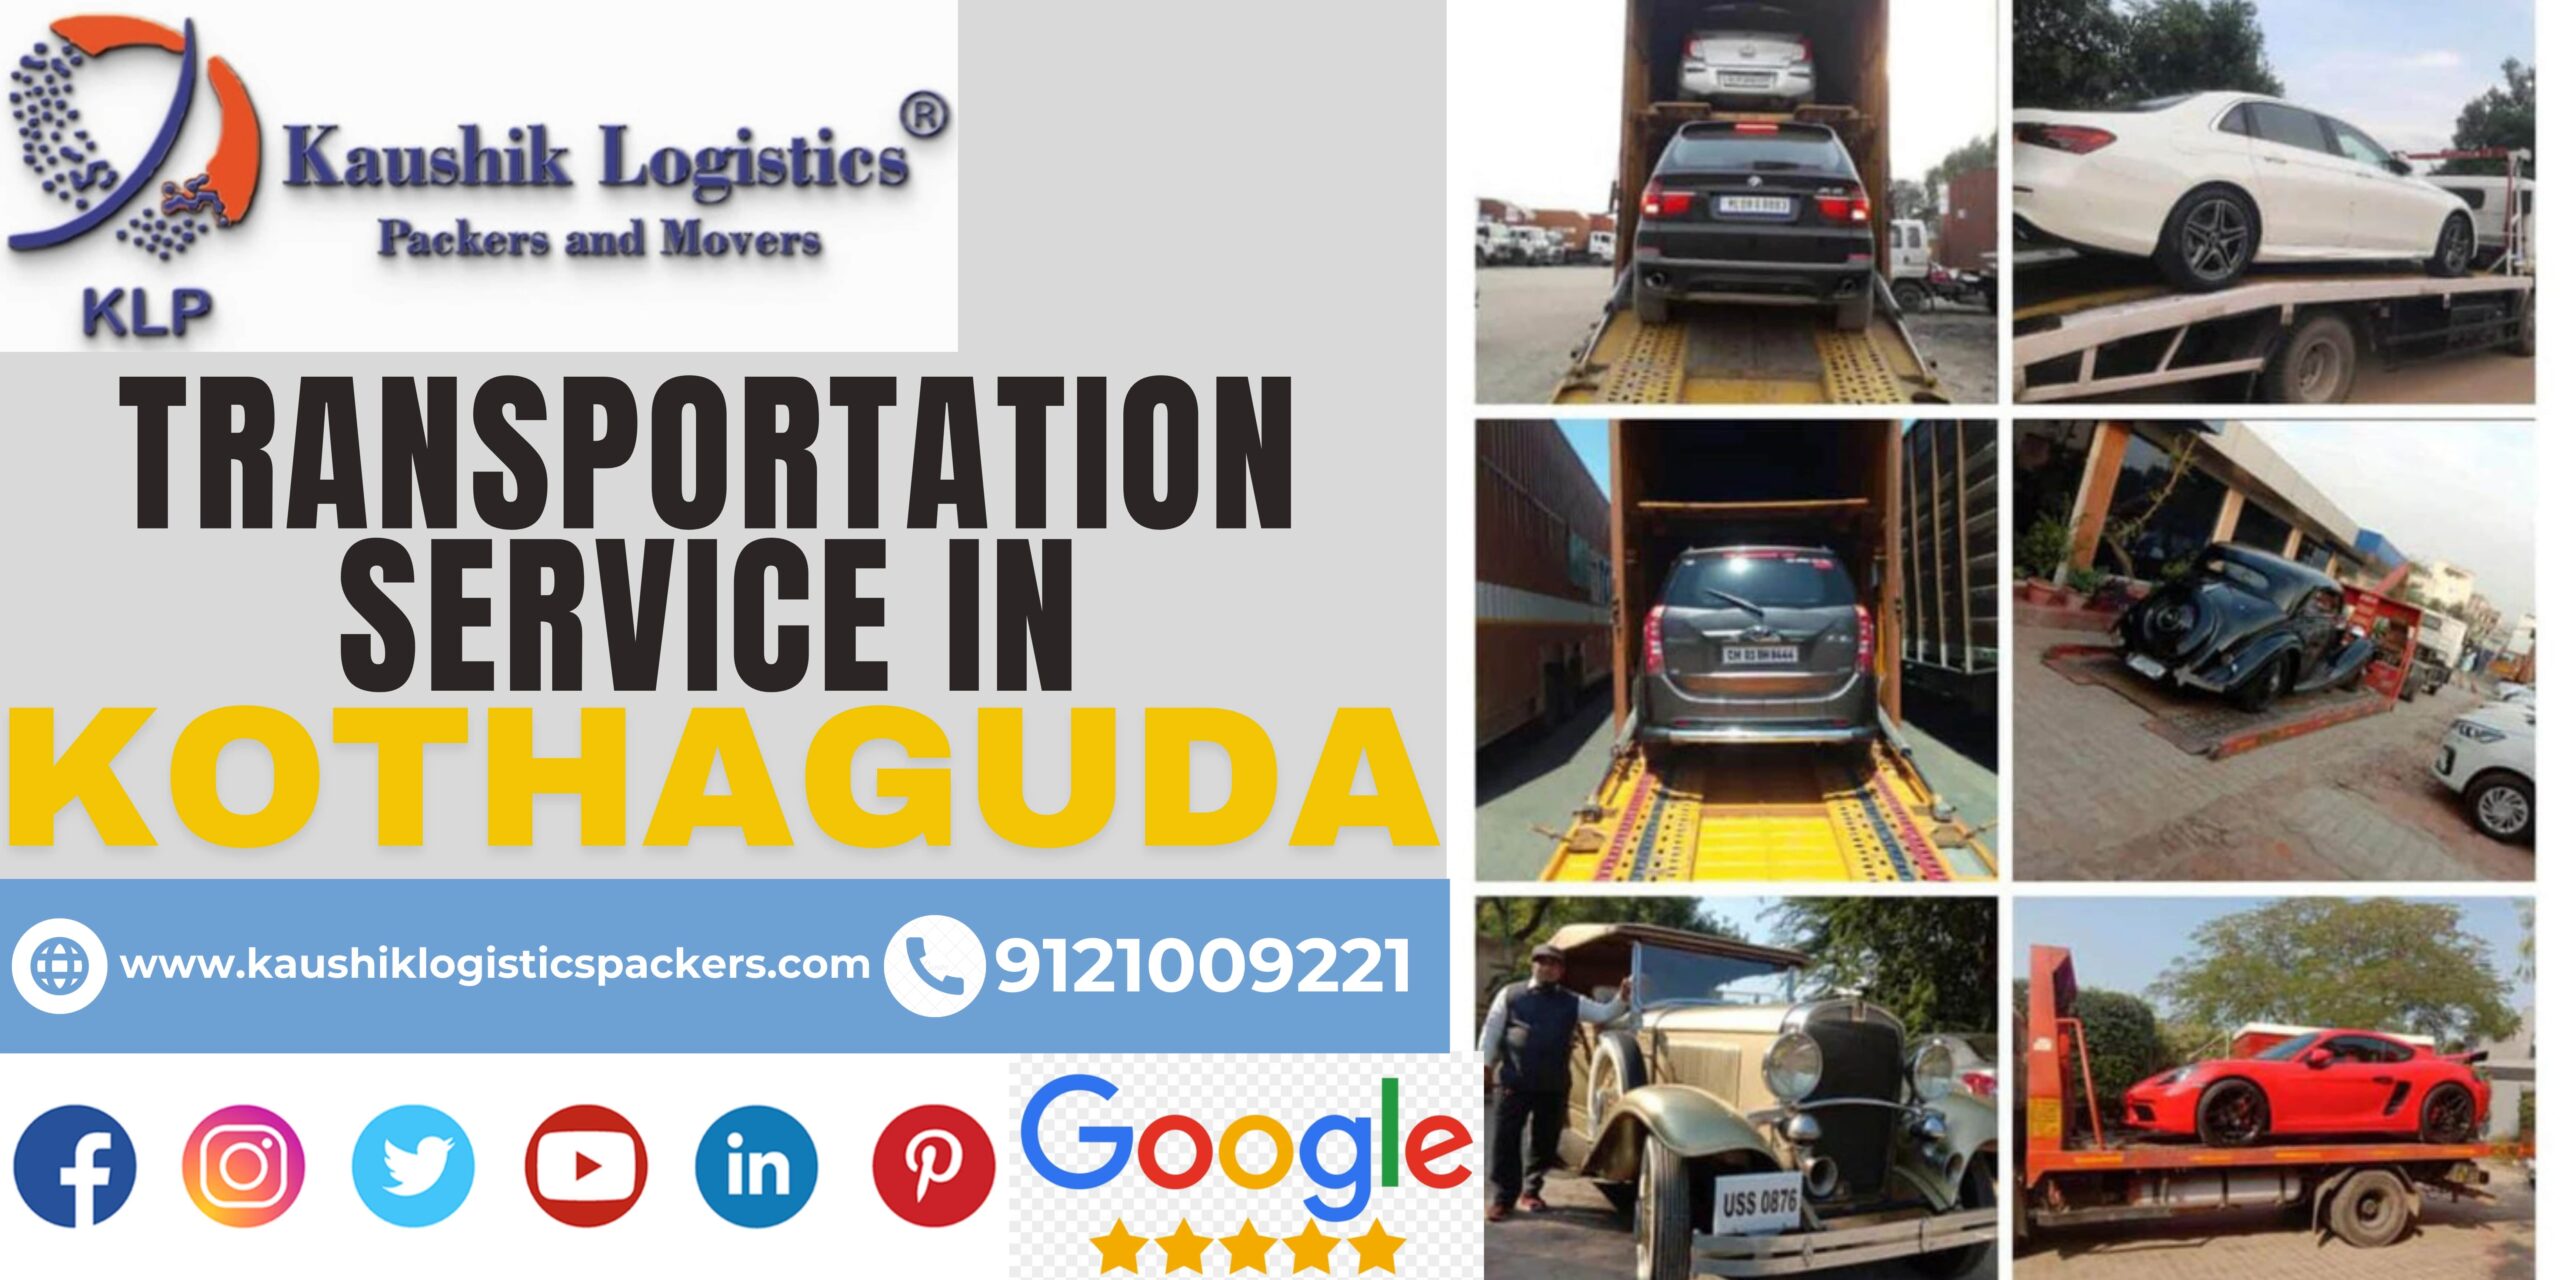 Packers and Movers In Kothaguda